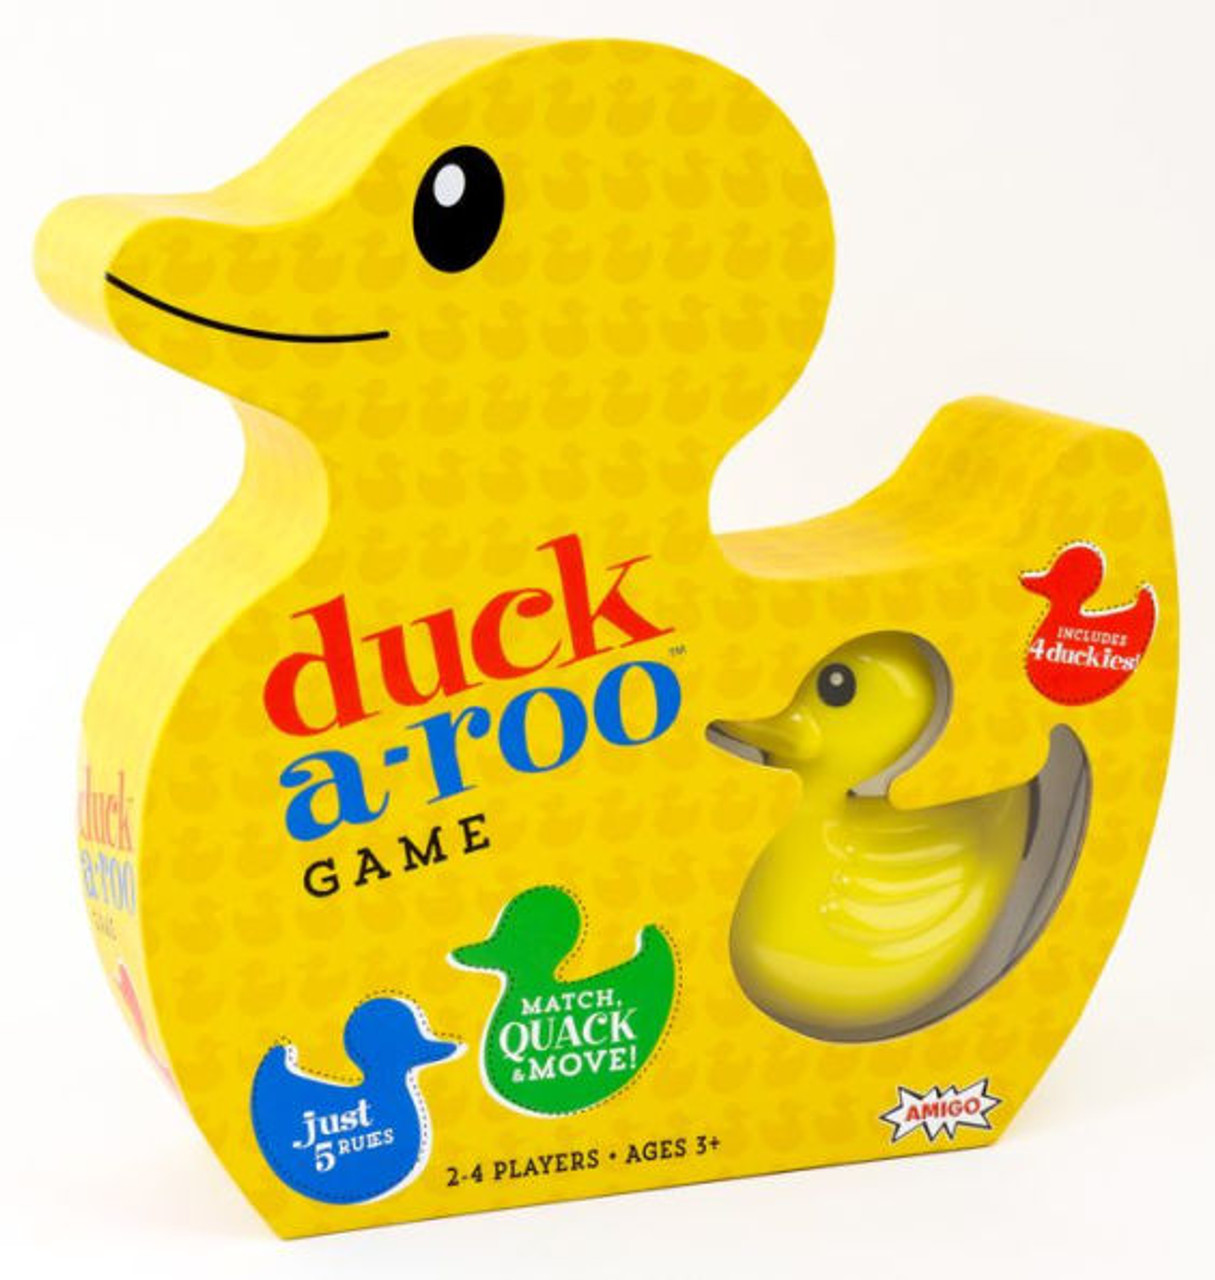 Duck-A-Roo Game